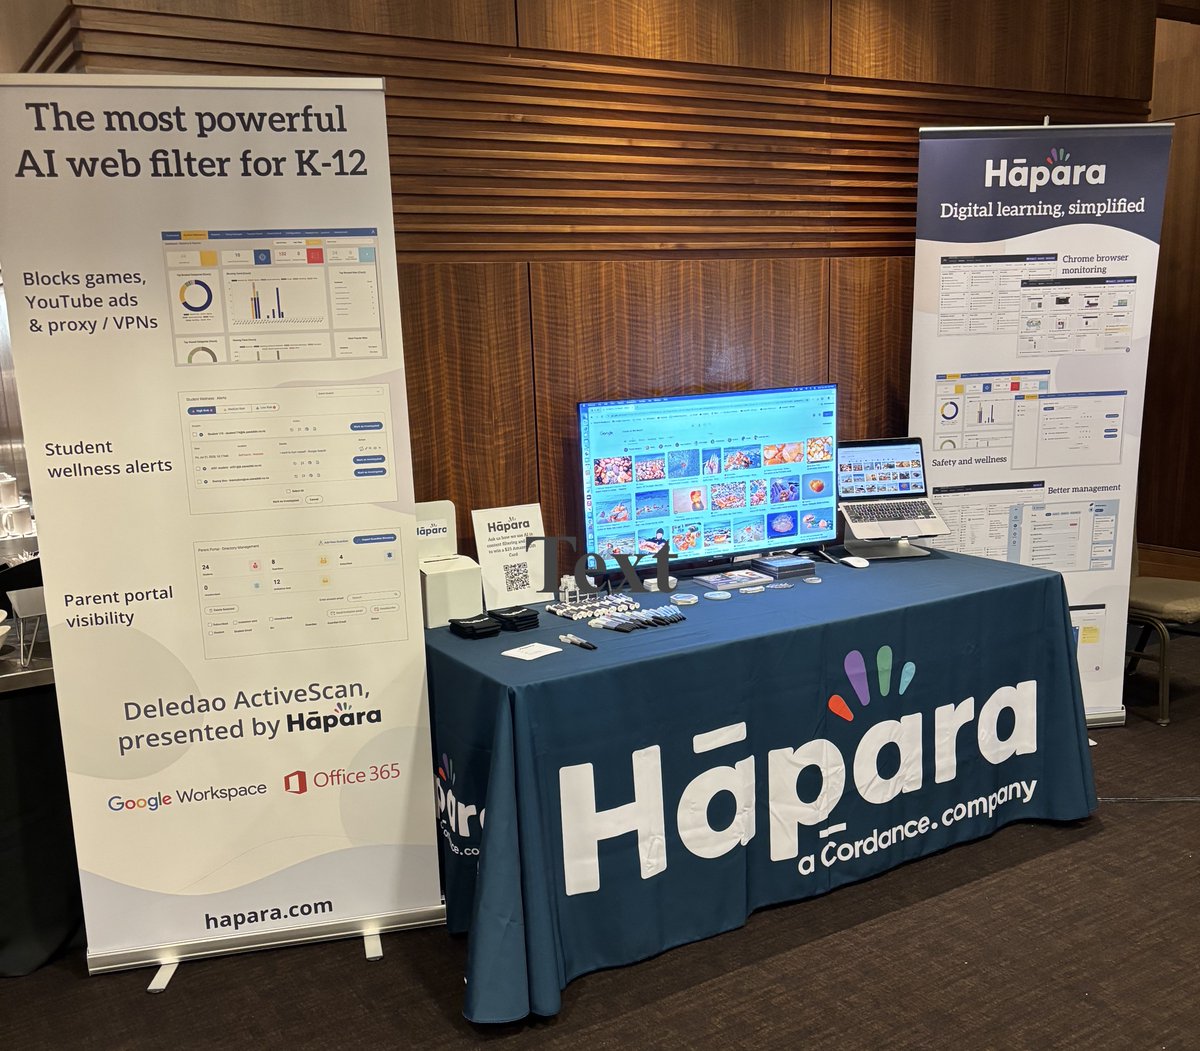 Hello, #dlsymp24, connect with Warren of Hāpara today in the Exhibitor Hall! Come by and explore:

✨ A screen monitoring tool with digital citizenship features

✨ A powerful AI web filter that blurs inappropriate content in real time

✨ Instant student wellness alerts